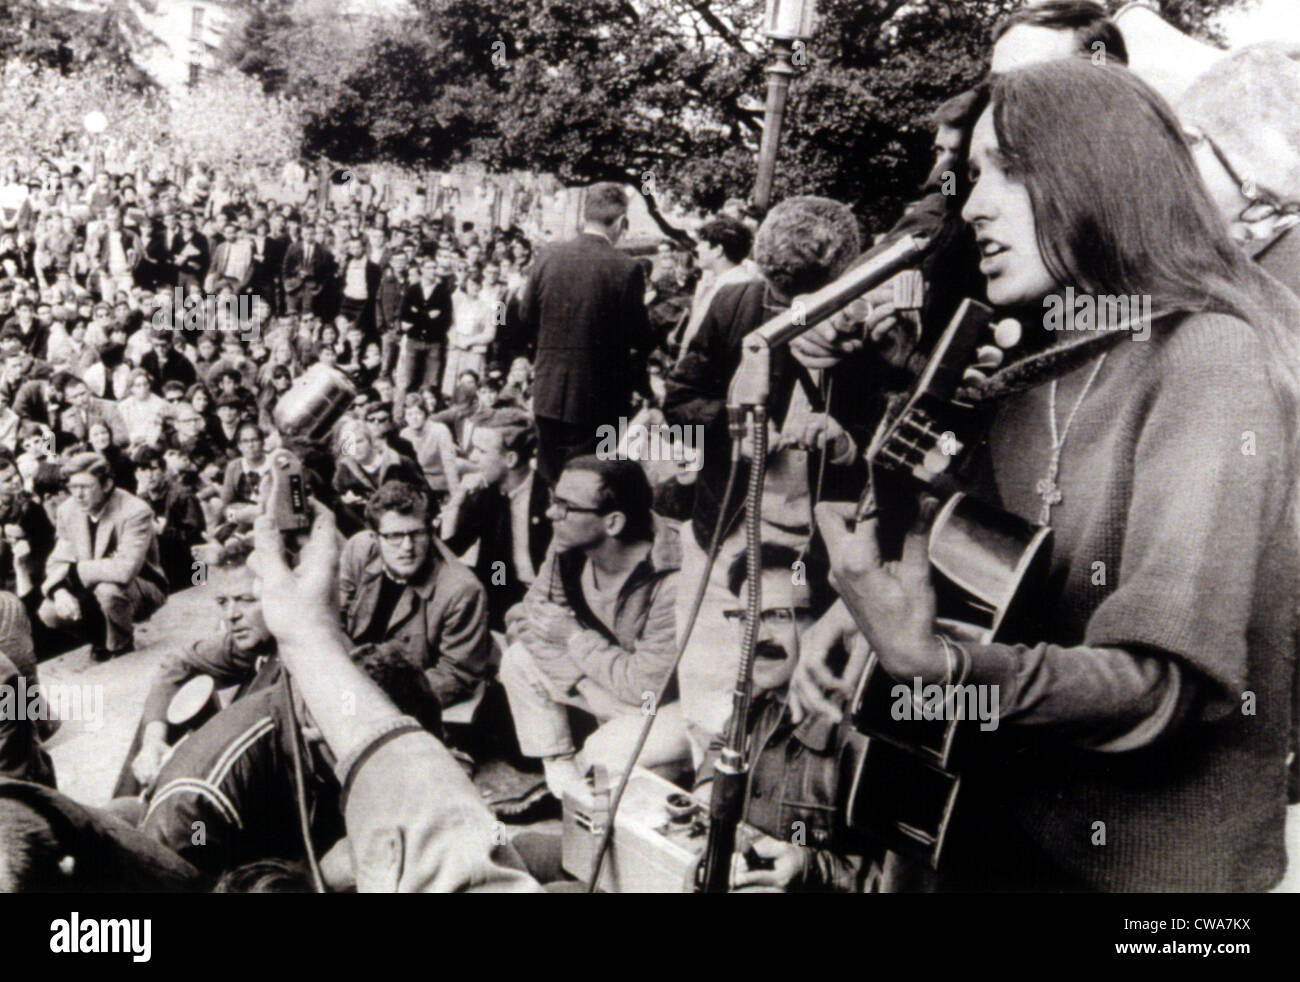 12-2-64 BERKELEY, CALIf.: Folk singer Joan Baez strums her guitar and sings freedom songs during a sit-in at the University of Stock Photo